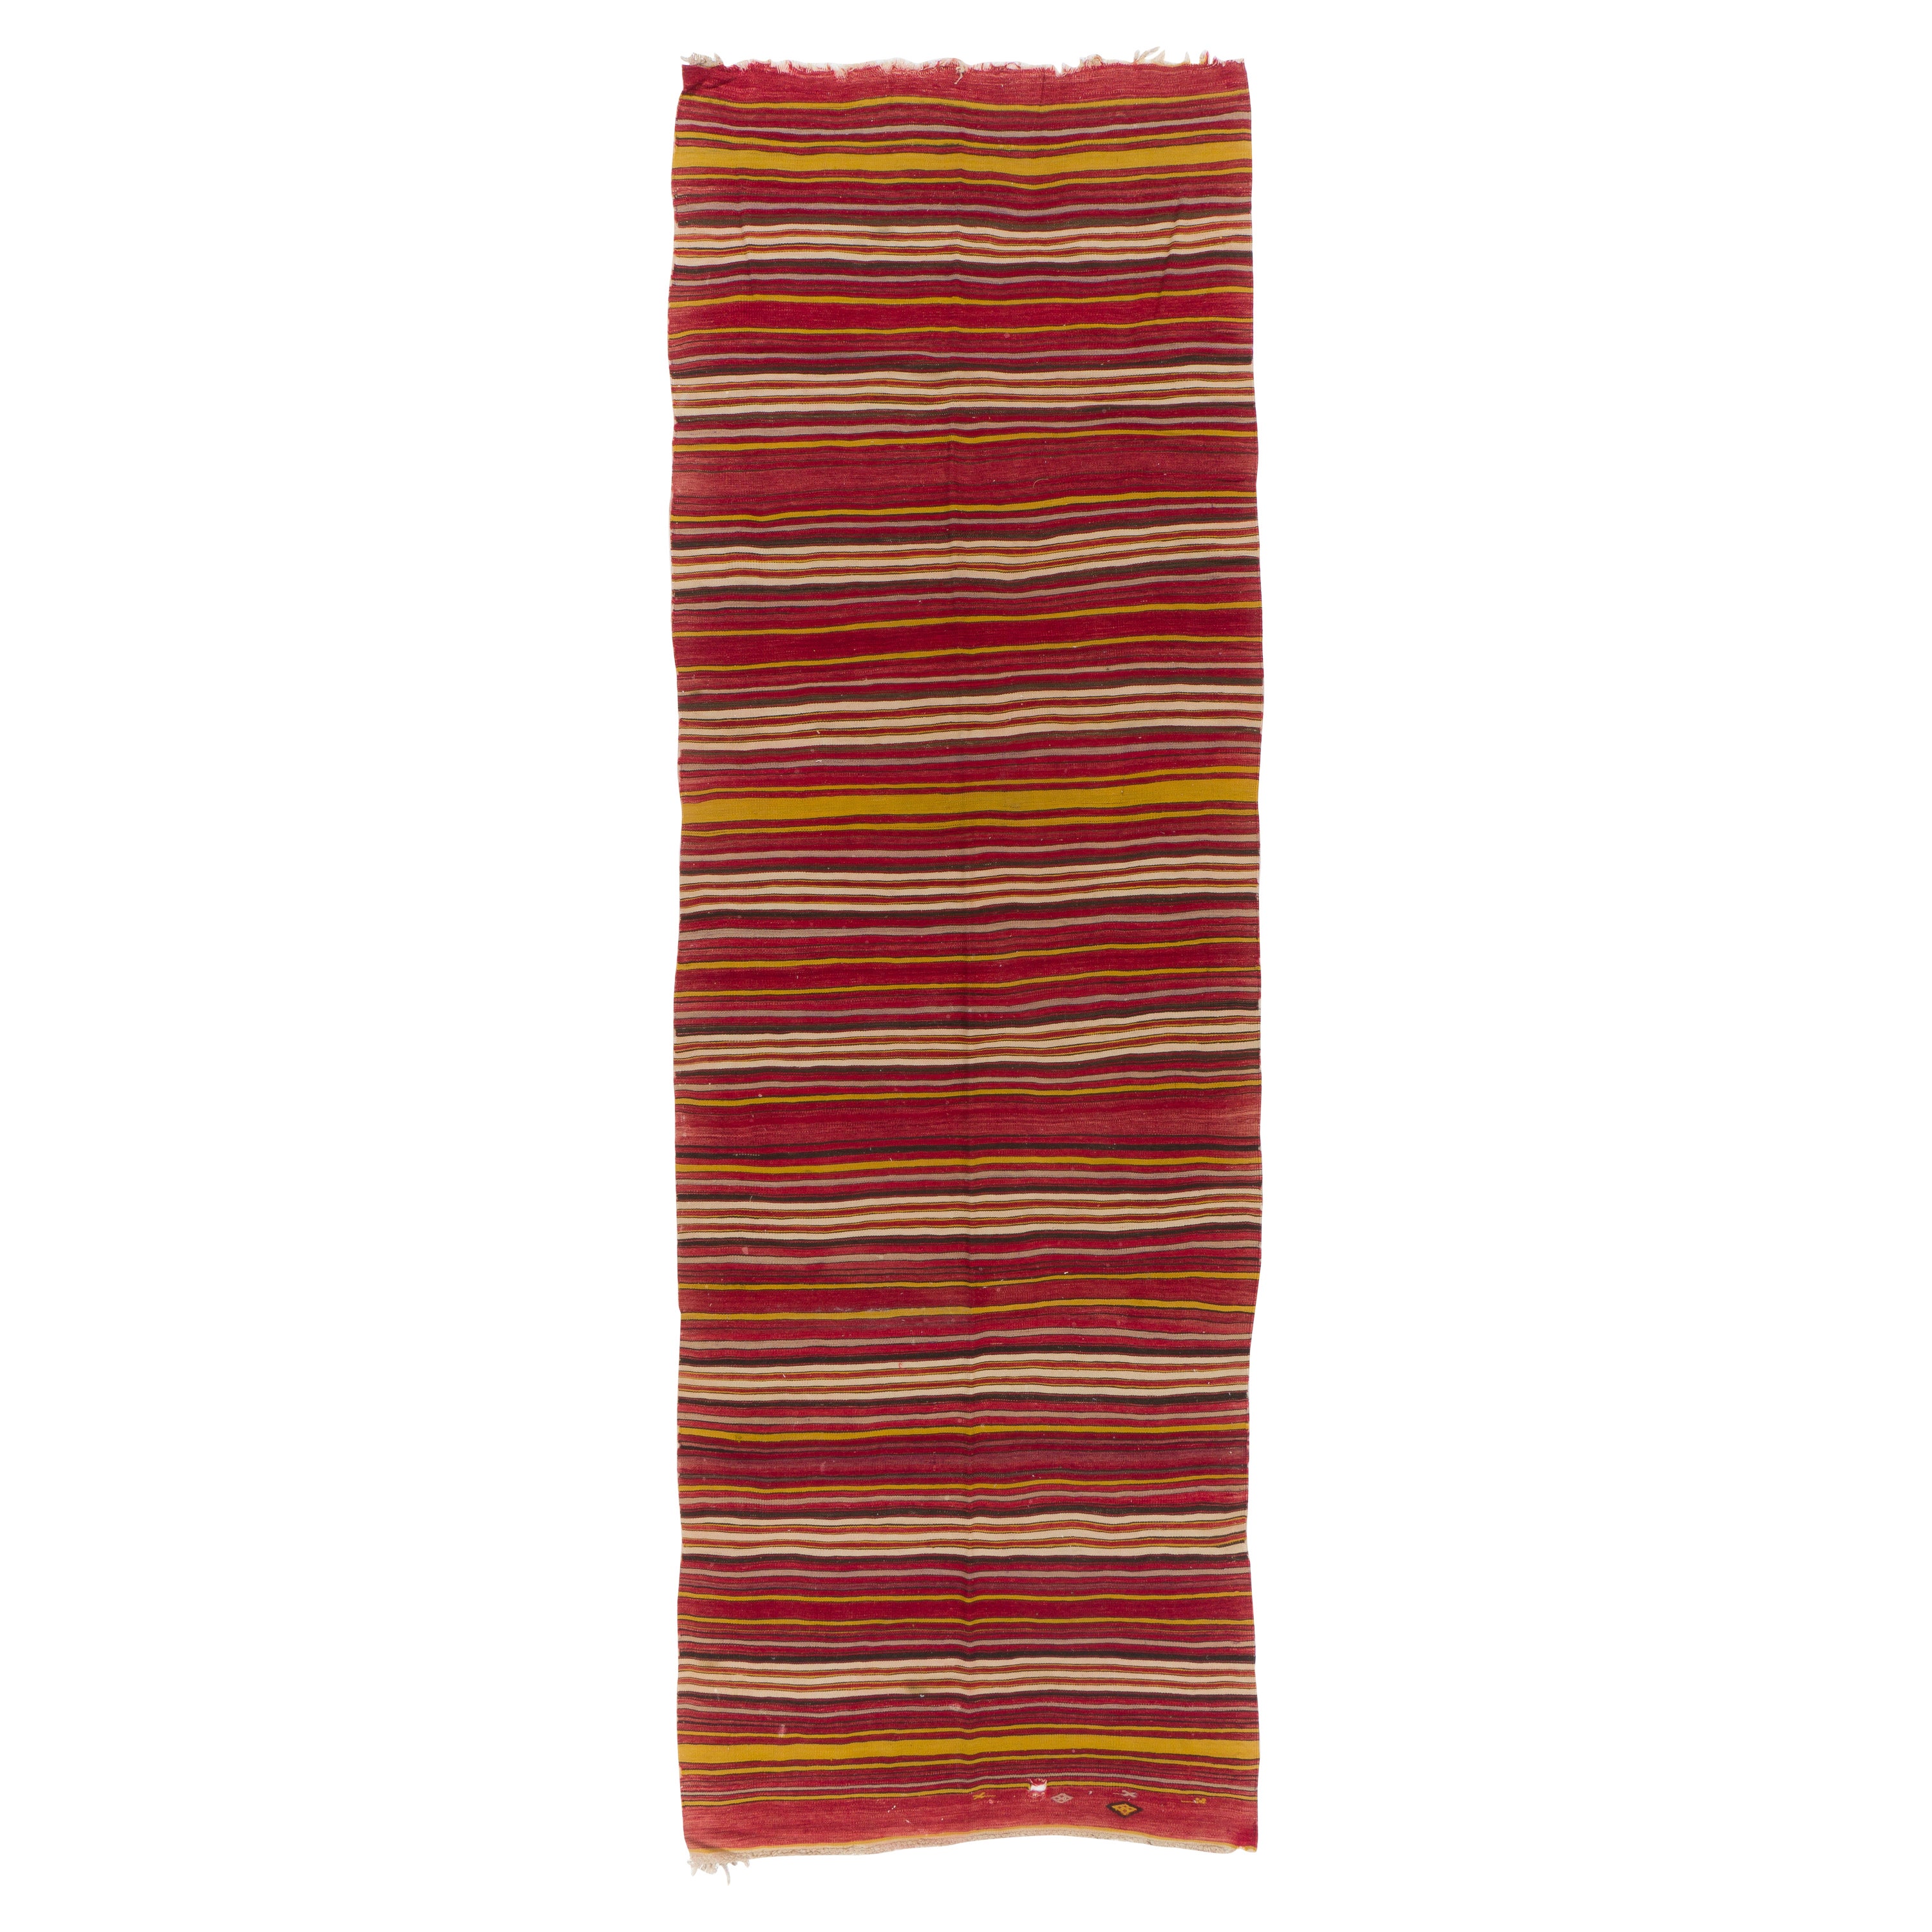 4.6x14.3 Ft Vintage Hand-Woven Turkish Kilim Runner in Red with Colorful Stripes For Sale